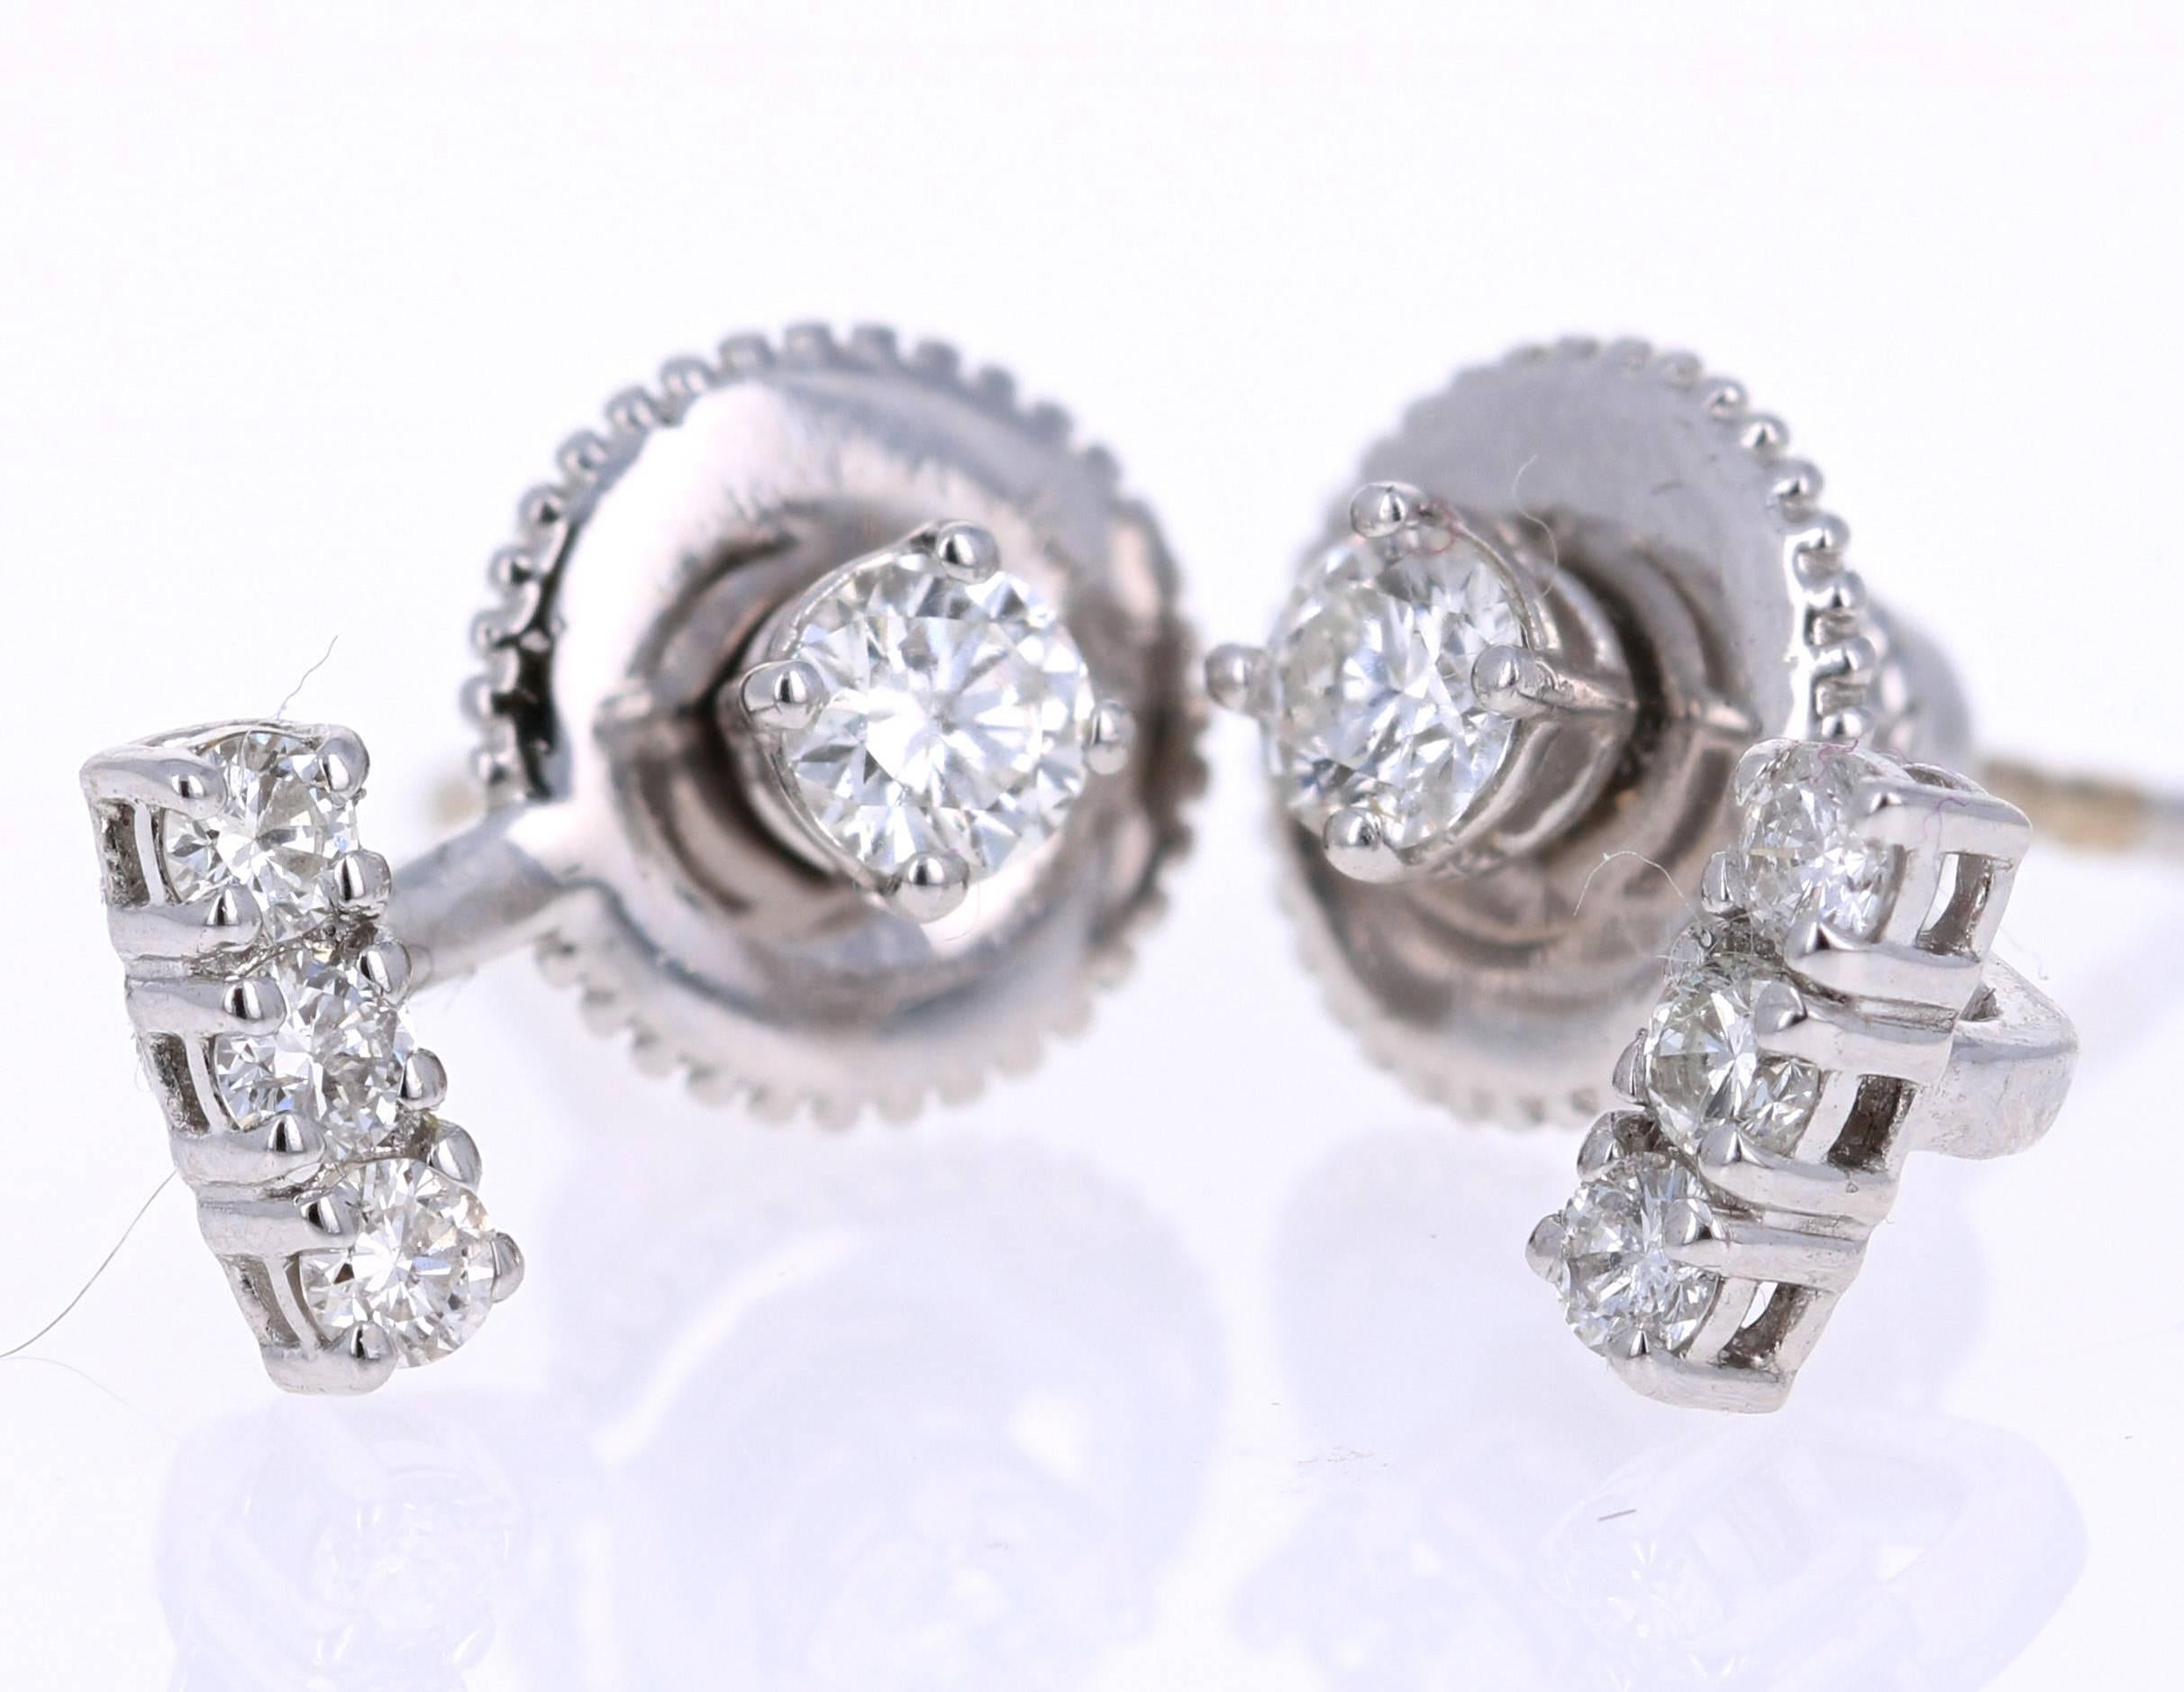 
0.45 Carat Round Cut Diamond 14K White Gold Ear Crawler Earrings!

Super cute and on-trend Ear crawler earrings.  These beauties have 8 Round Cut Diamonds that weigh 0.45 carats (Clarity:  VS2, Color: F)

The backing of the earring is a standard